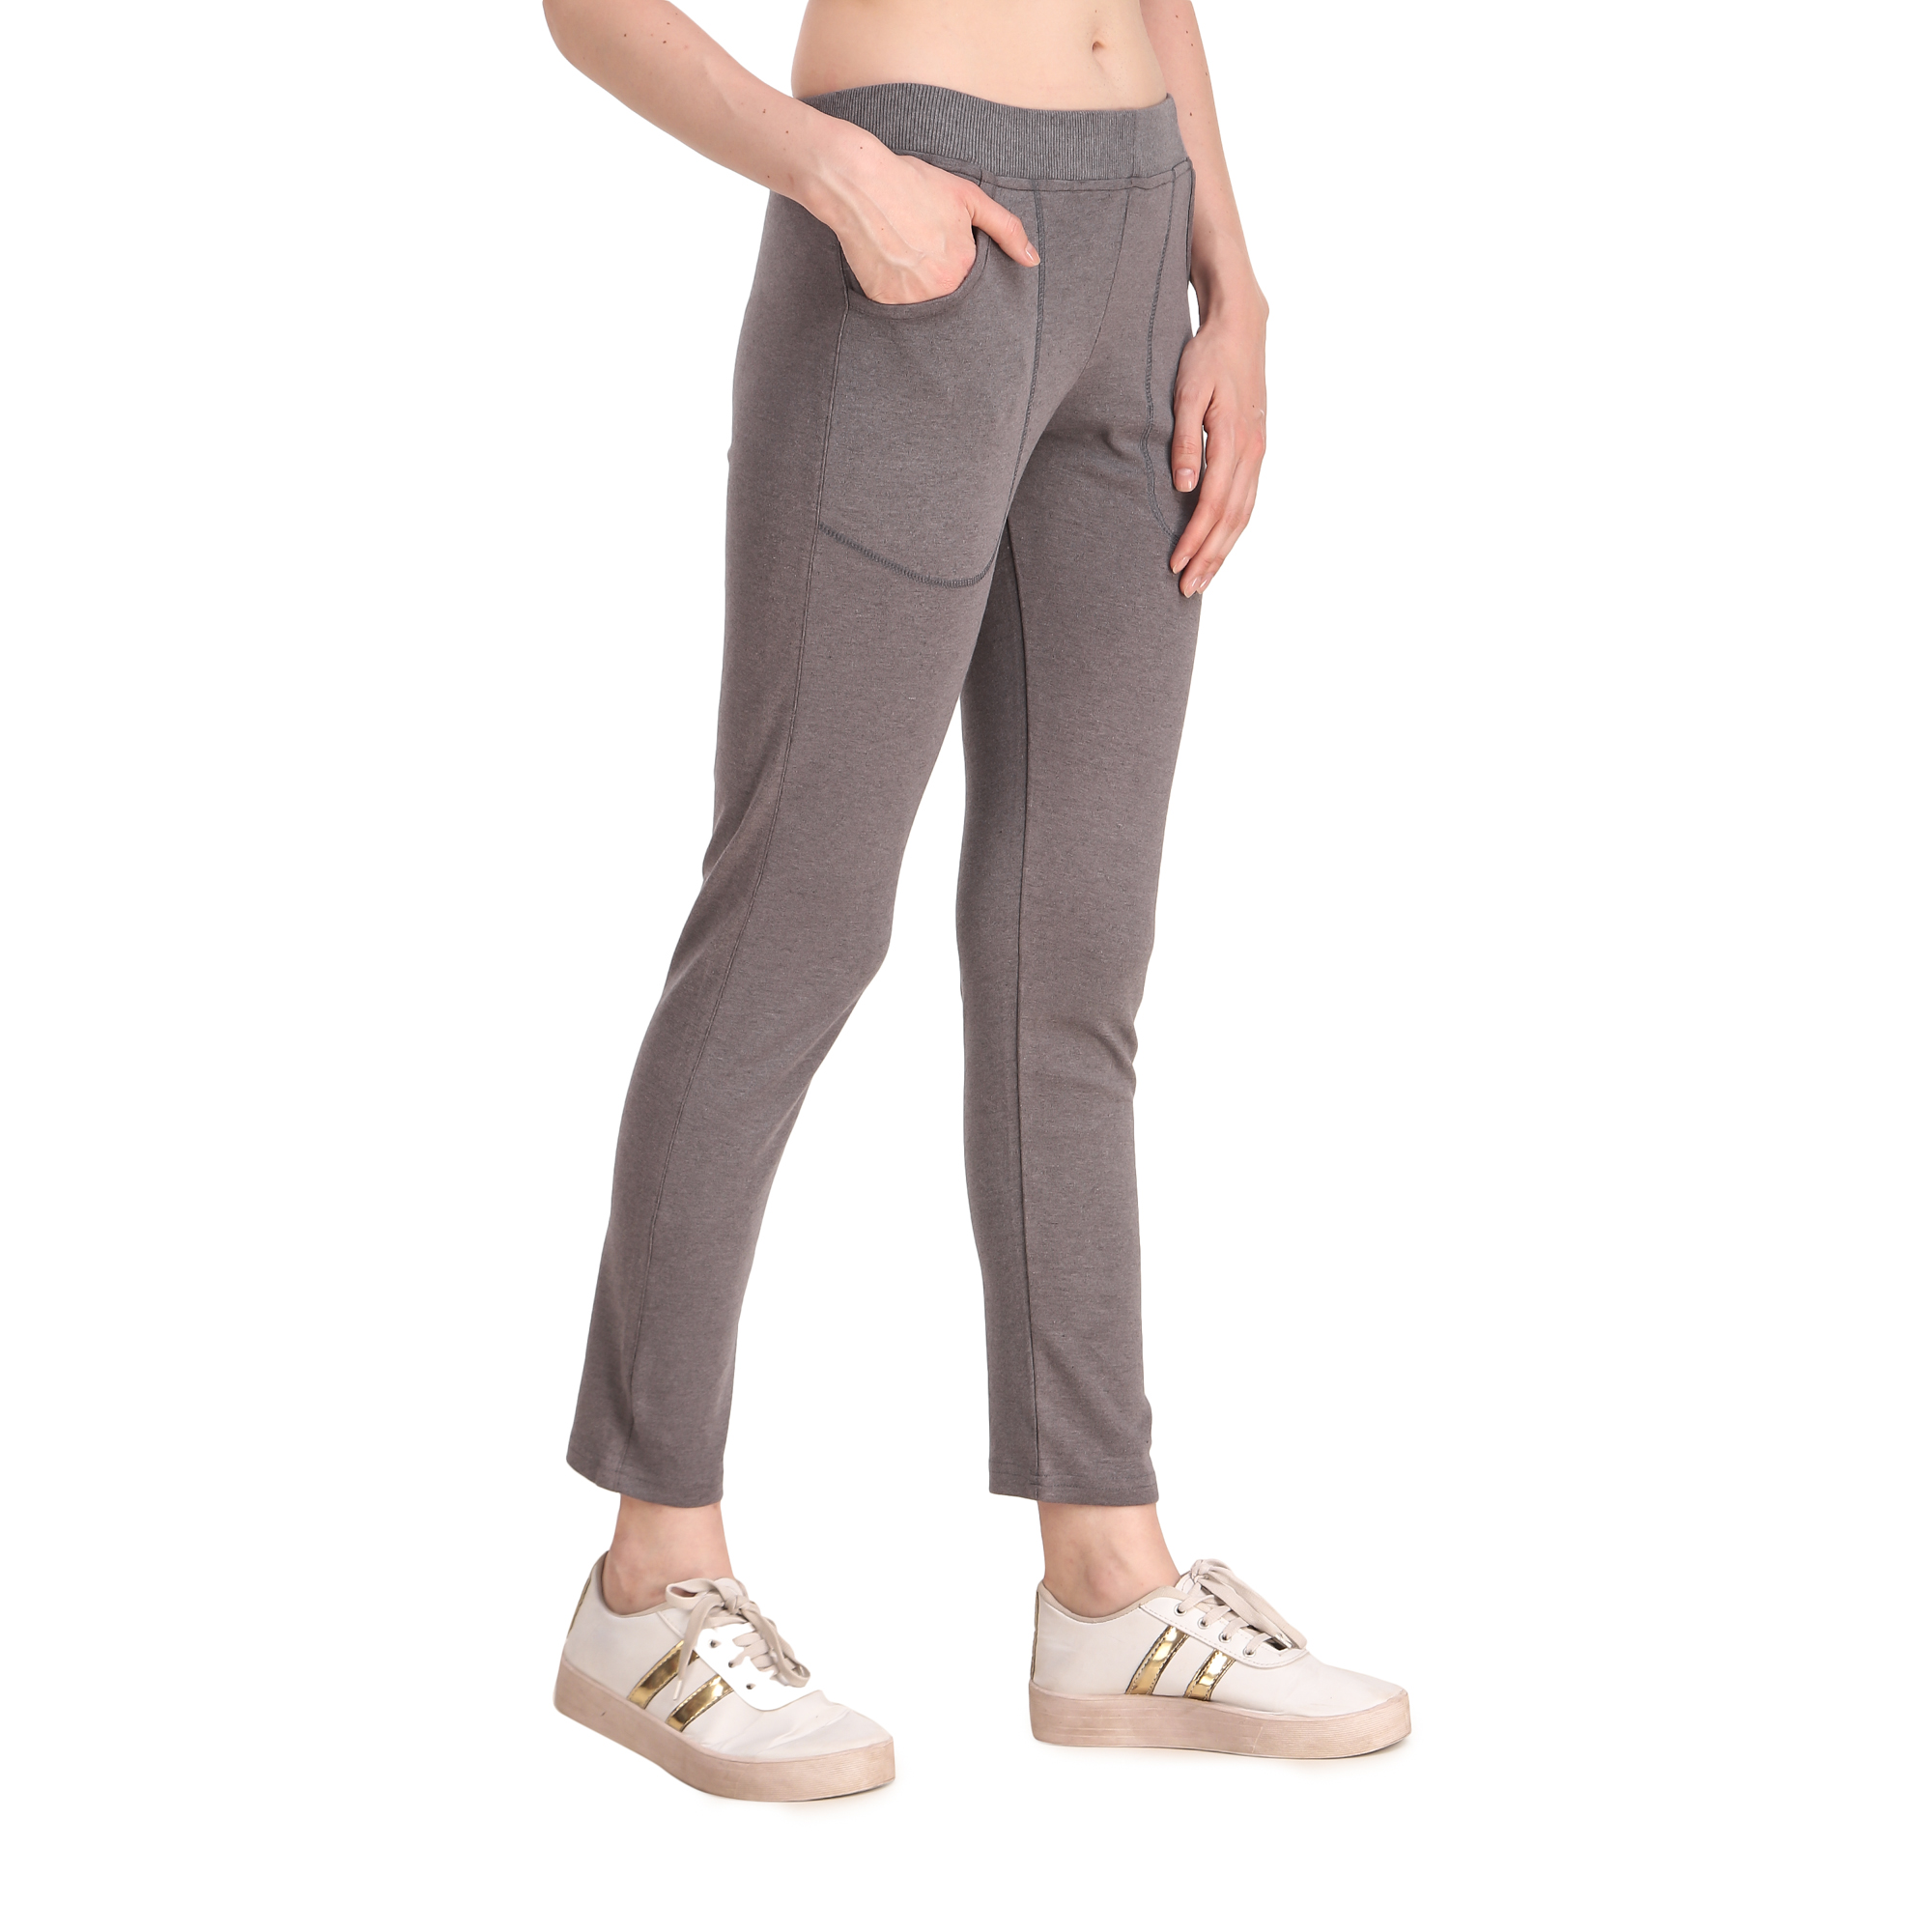 Cotton Track Pants for Women's (Grey)